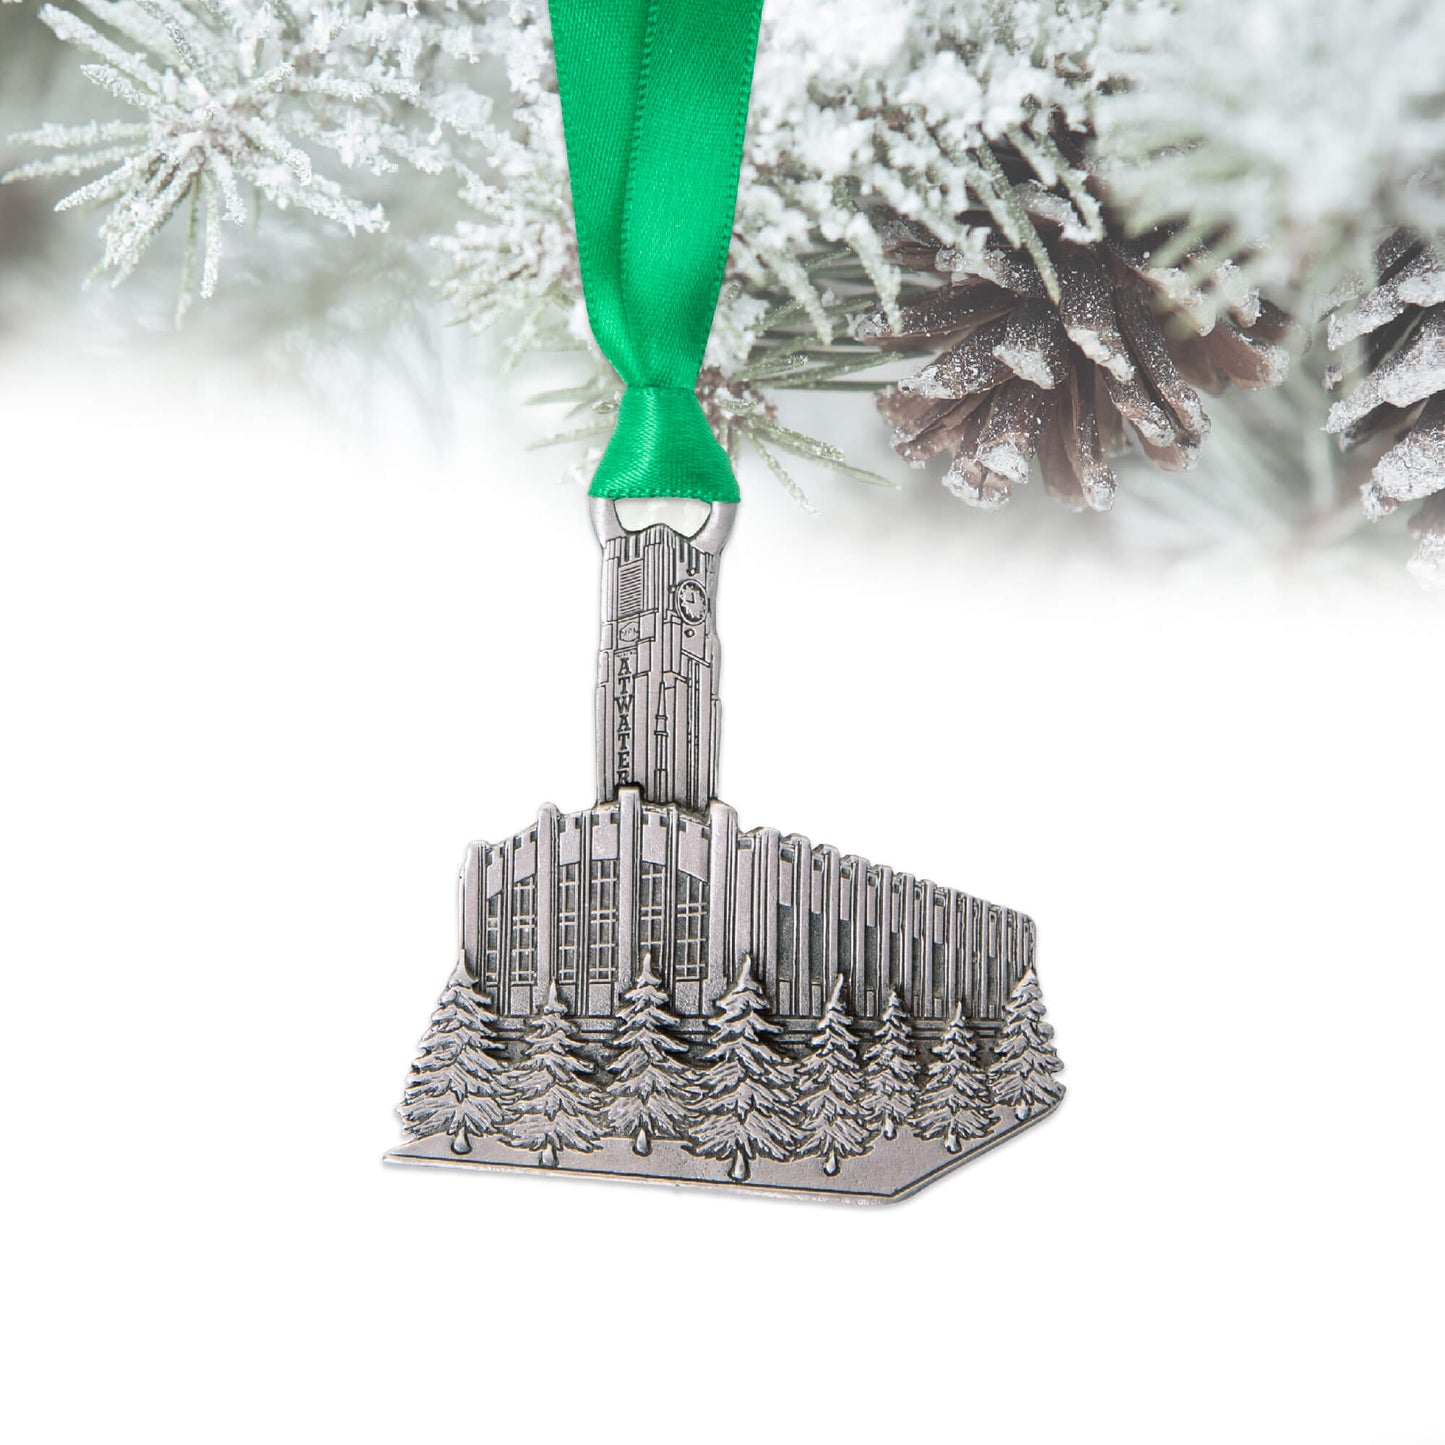 atwater market, pewter ornament, green ribbon, holiday ornament